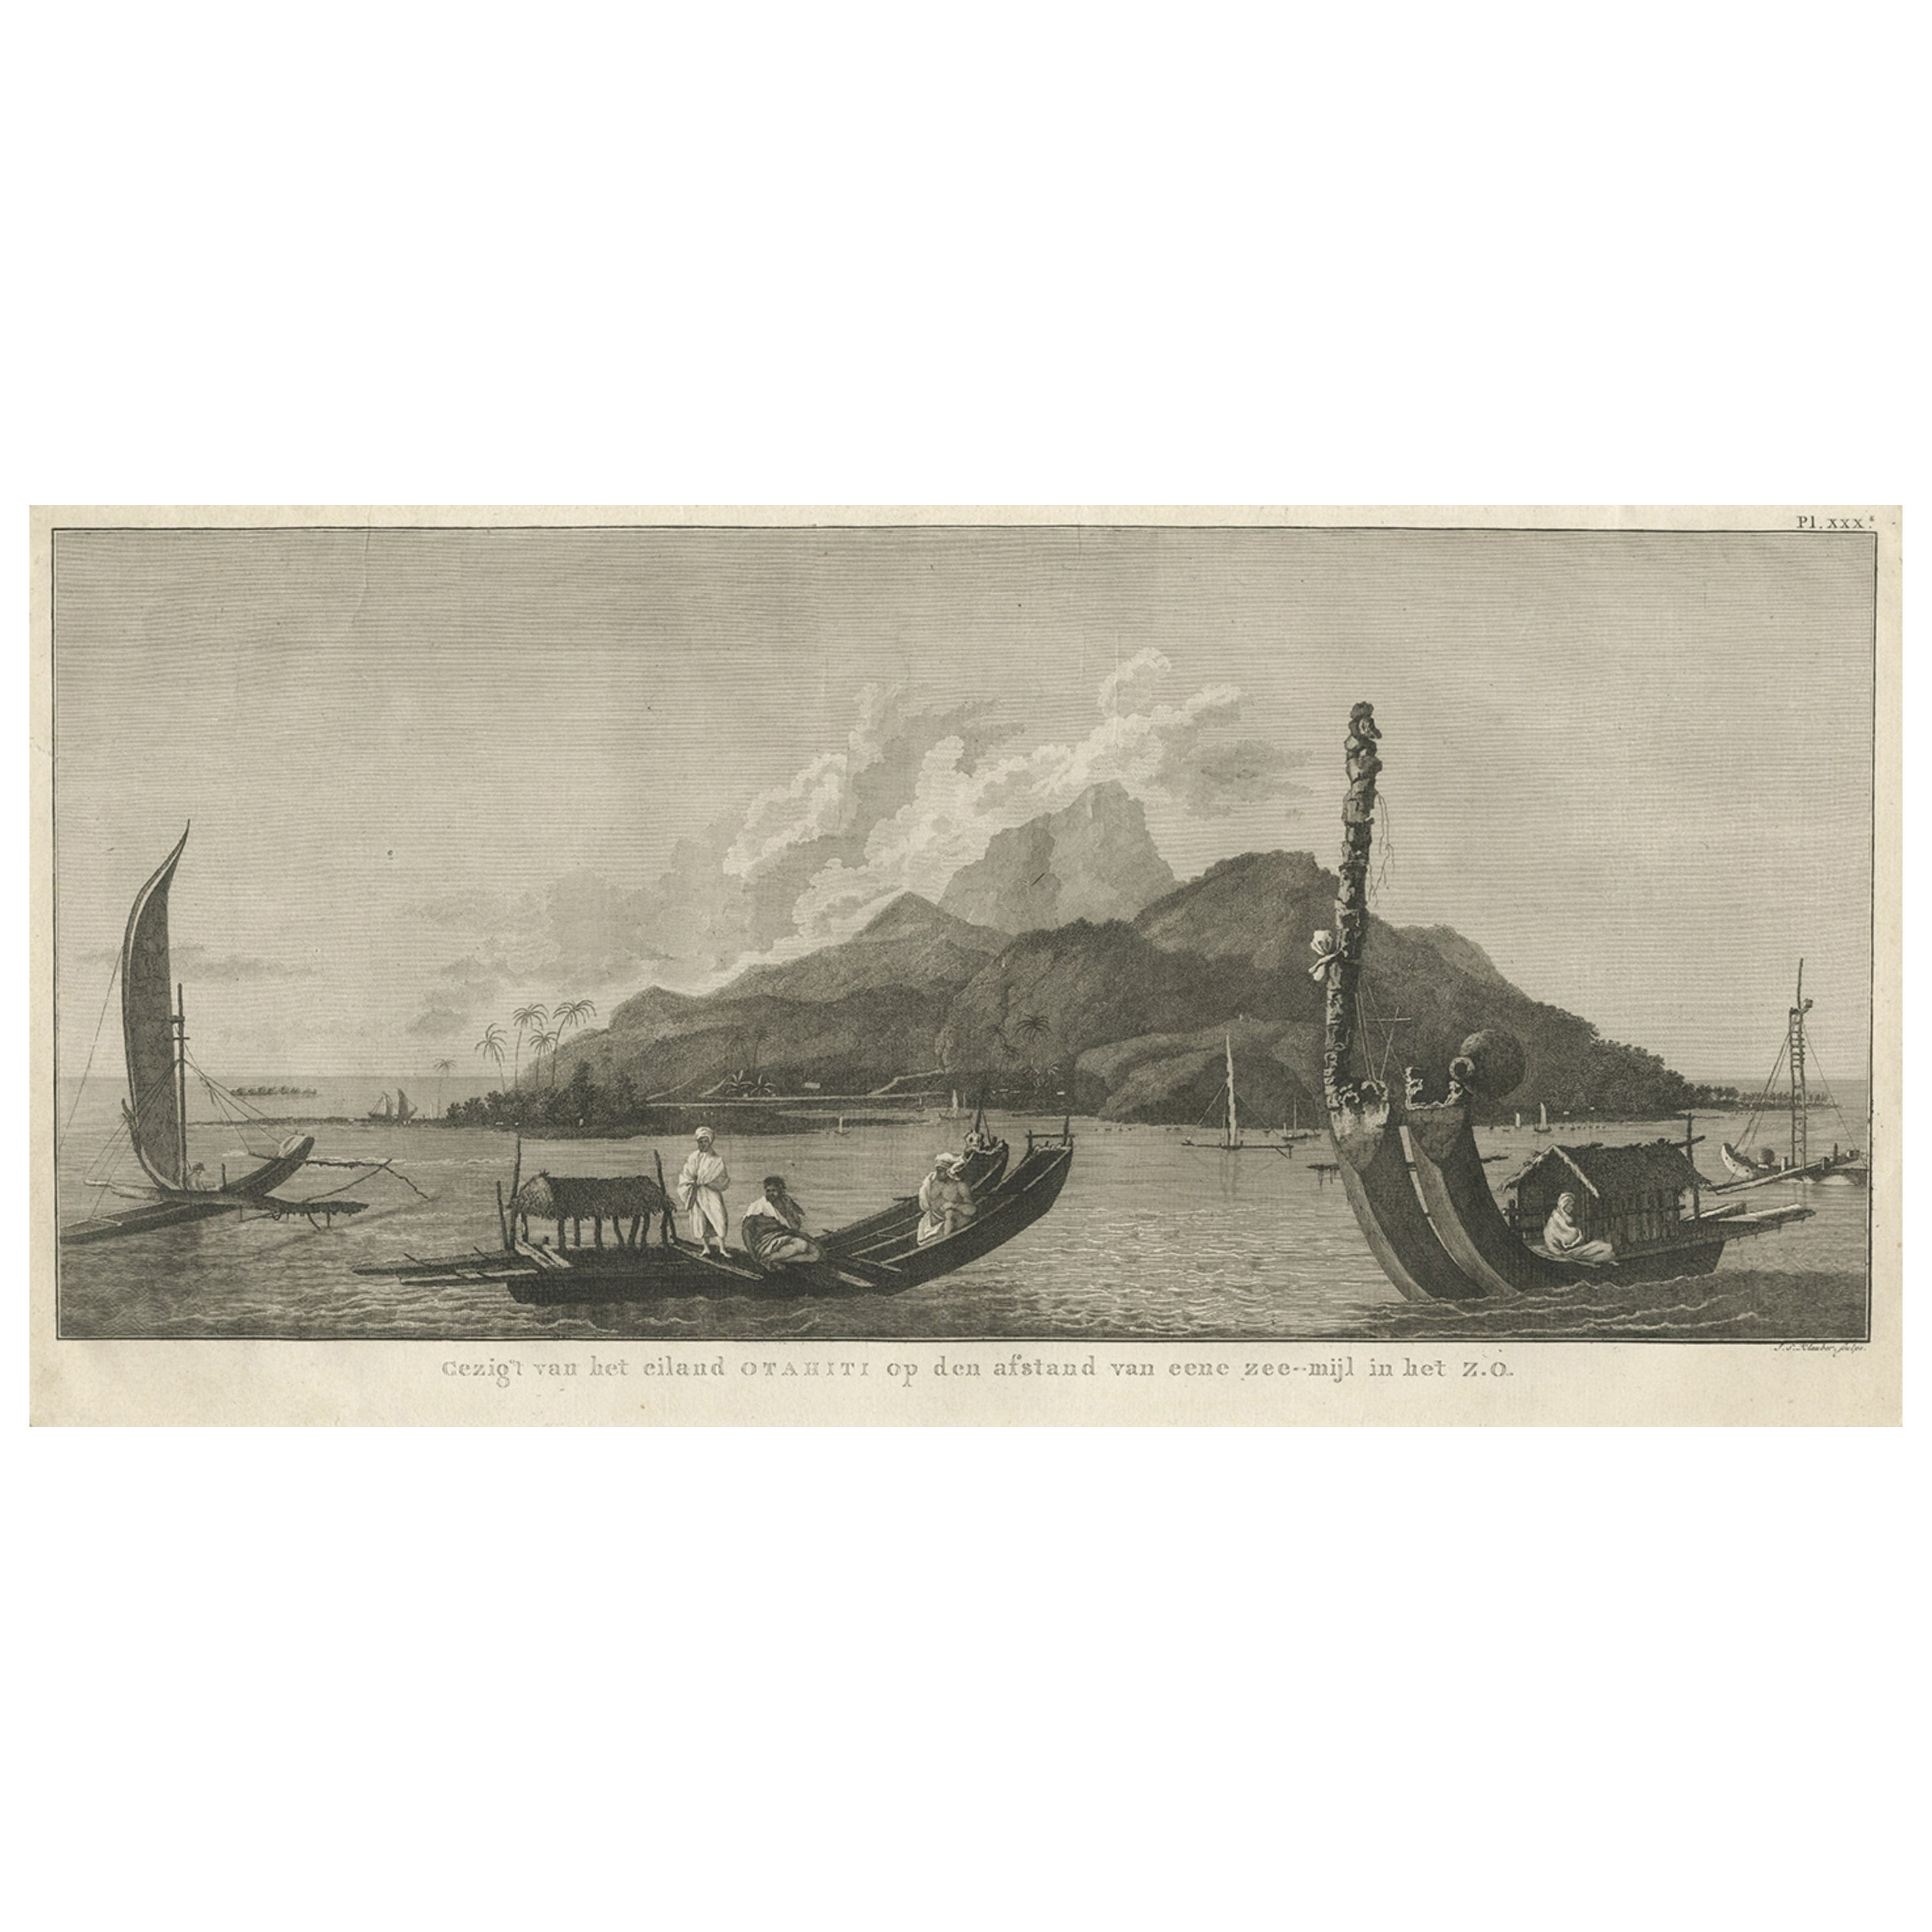 View of the Island of Tahiti, with Outrigger Canoes and Sailing Catamarans, 1803